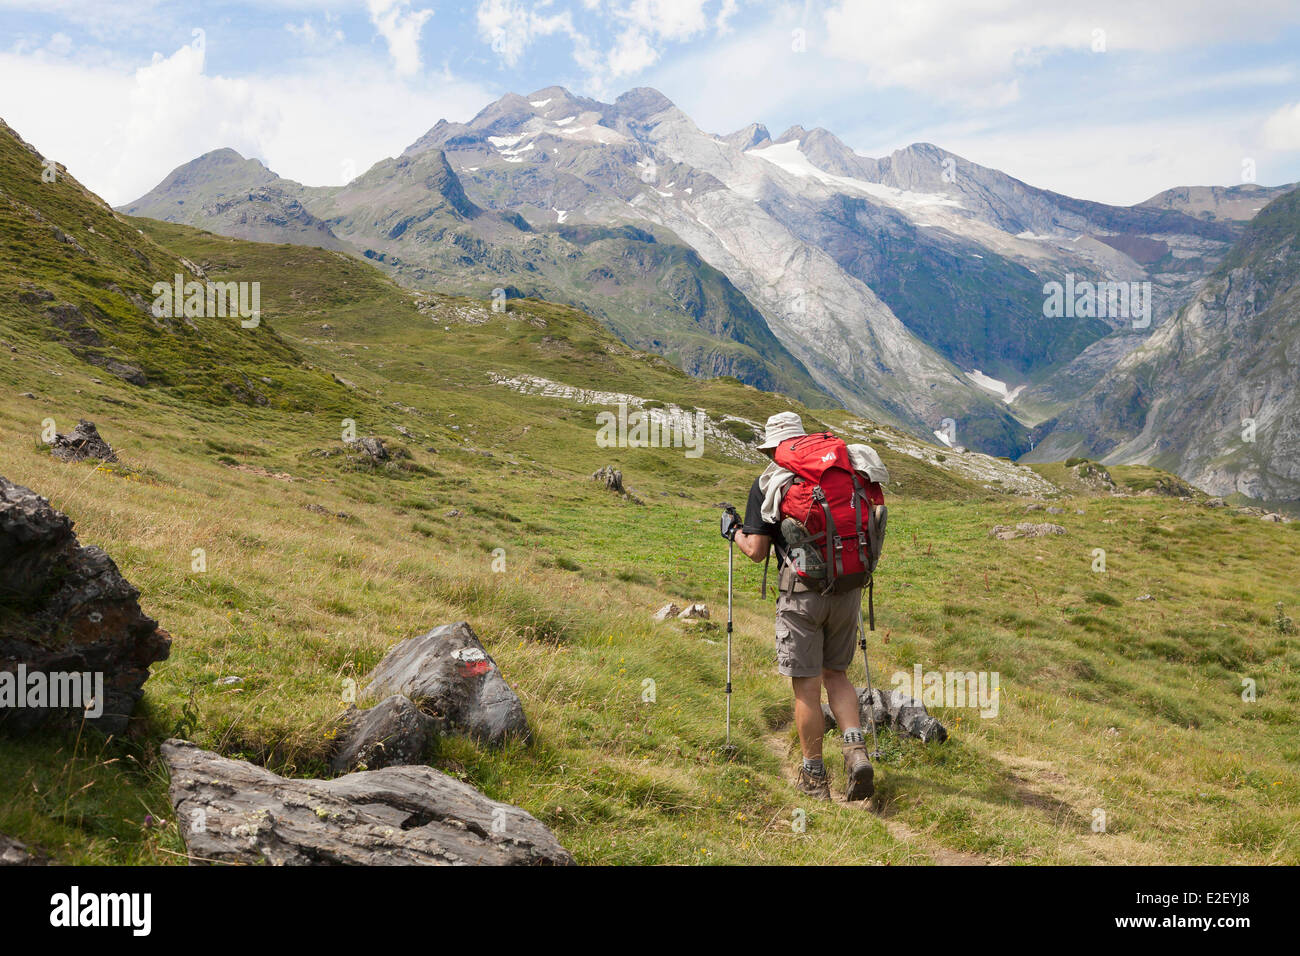 France, Hautes Pyrenees, Gavarnie, Vignemale massif, hiker on the GR10 footpath, Ossoue valley Stock Photo